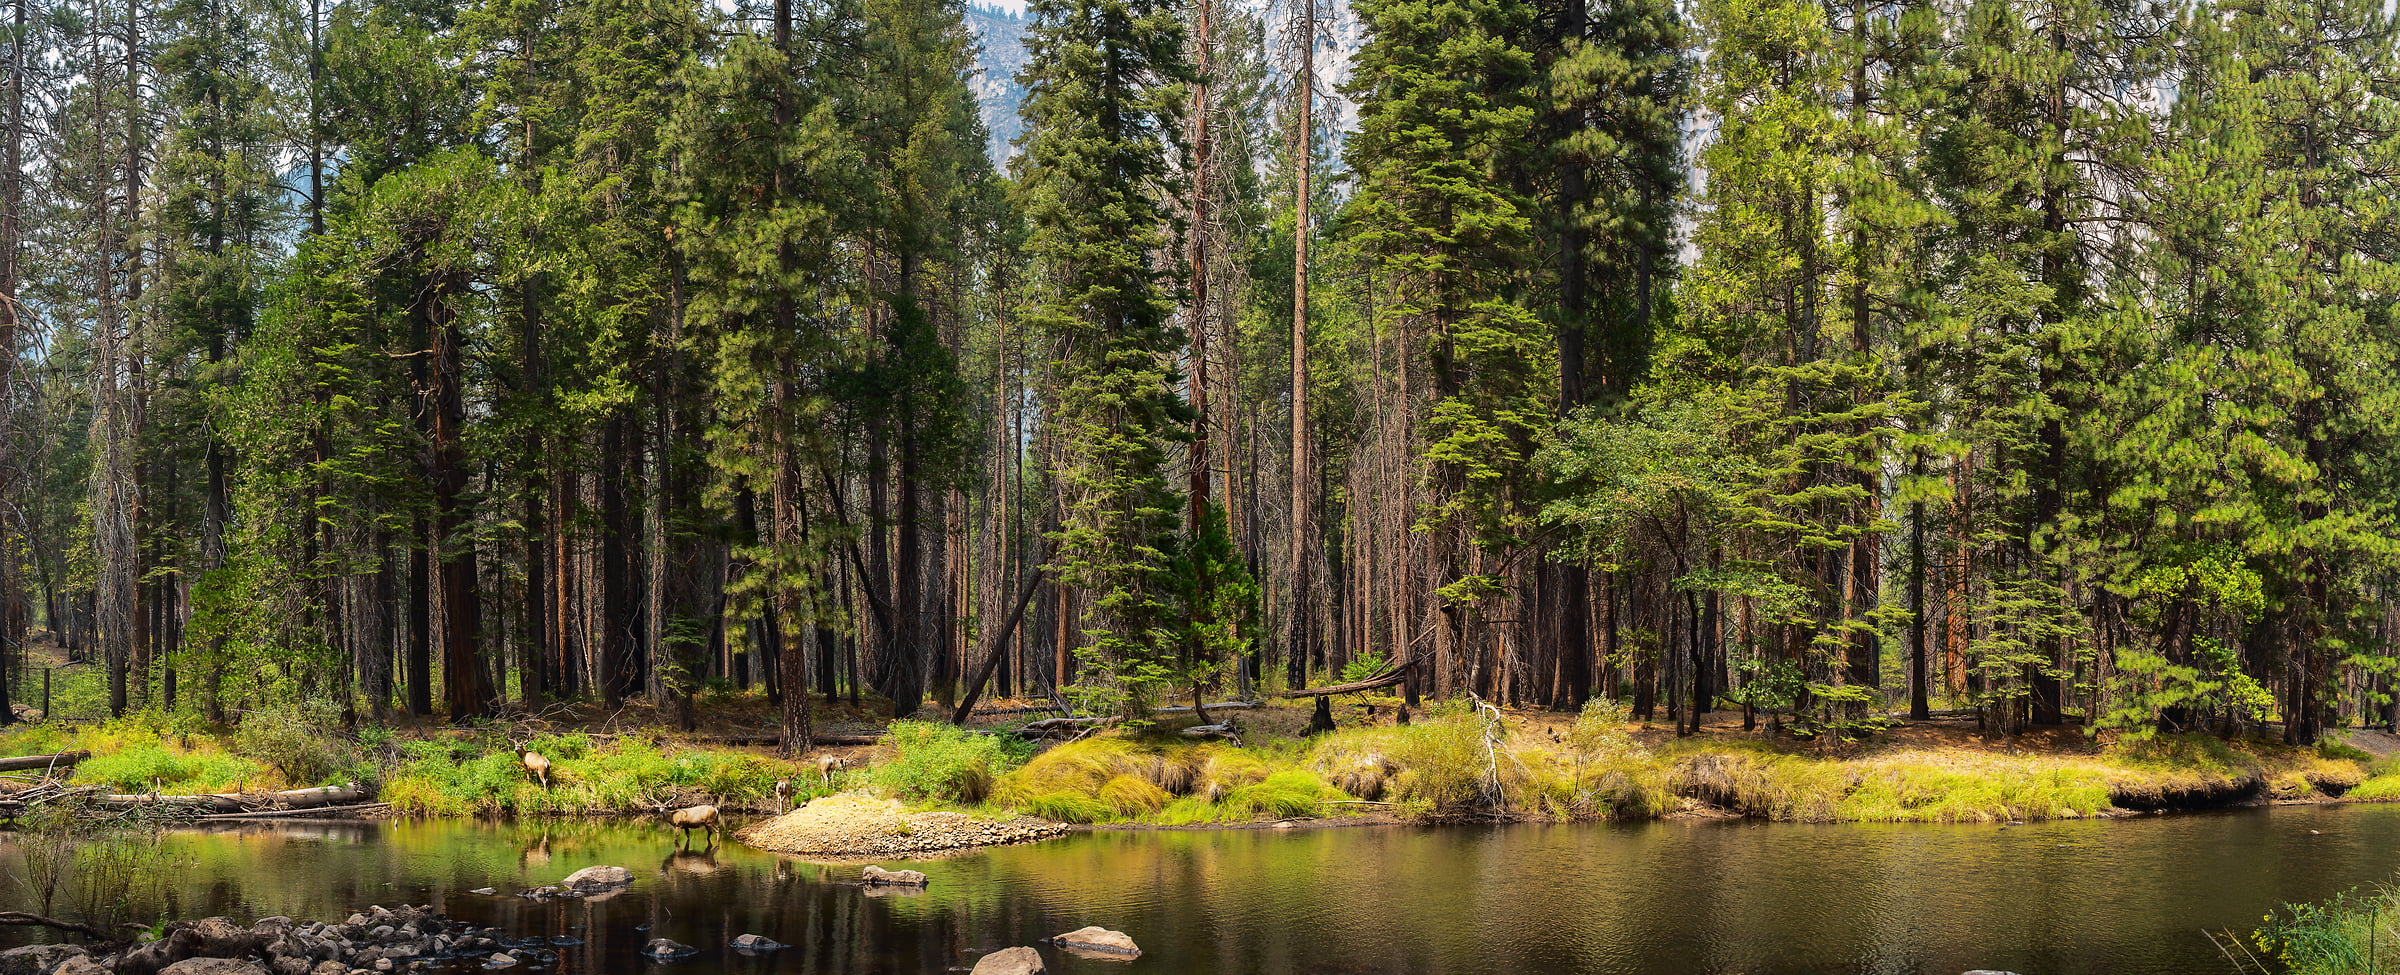 316 megapixels! A very high resolution, large-format VAST photo of a forest with a river that deer are drinking from; fine art nature photograph of the Merced River created by Jim Tarpo in Yosemite National Park, California.